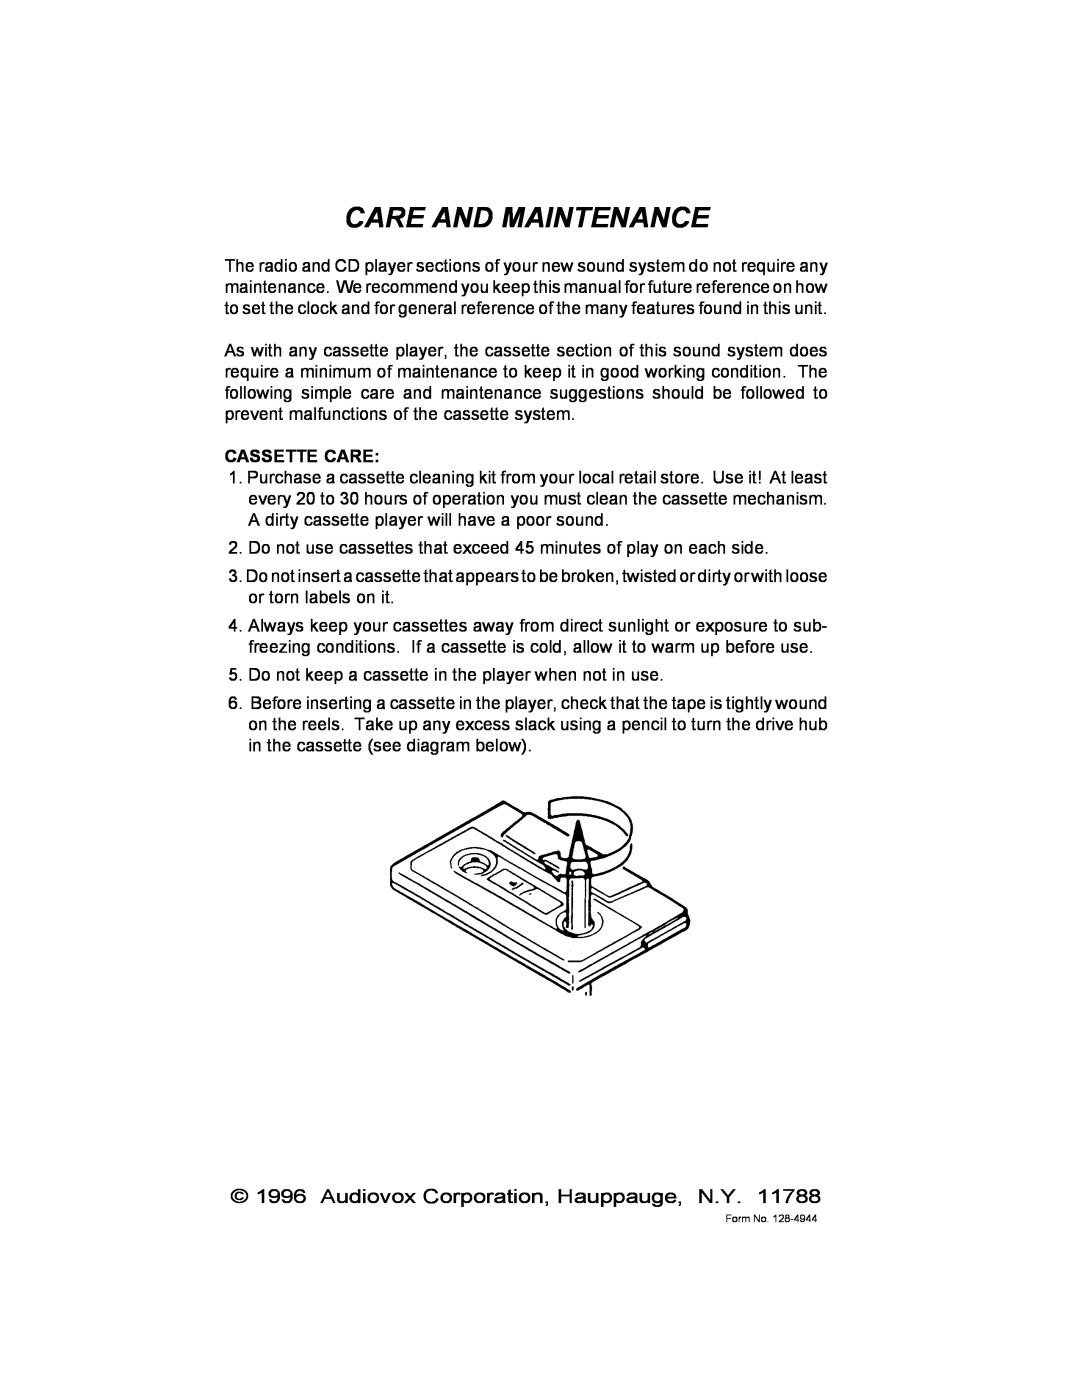 Audiovox AXTM600 owner manual Care And Maintenance, Audiovox Corporation, Hauppauge, N.Y 